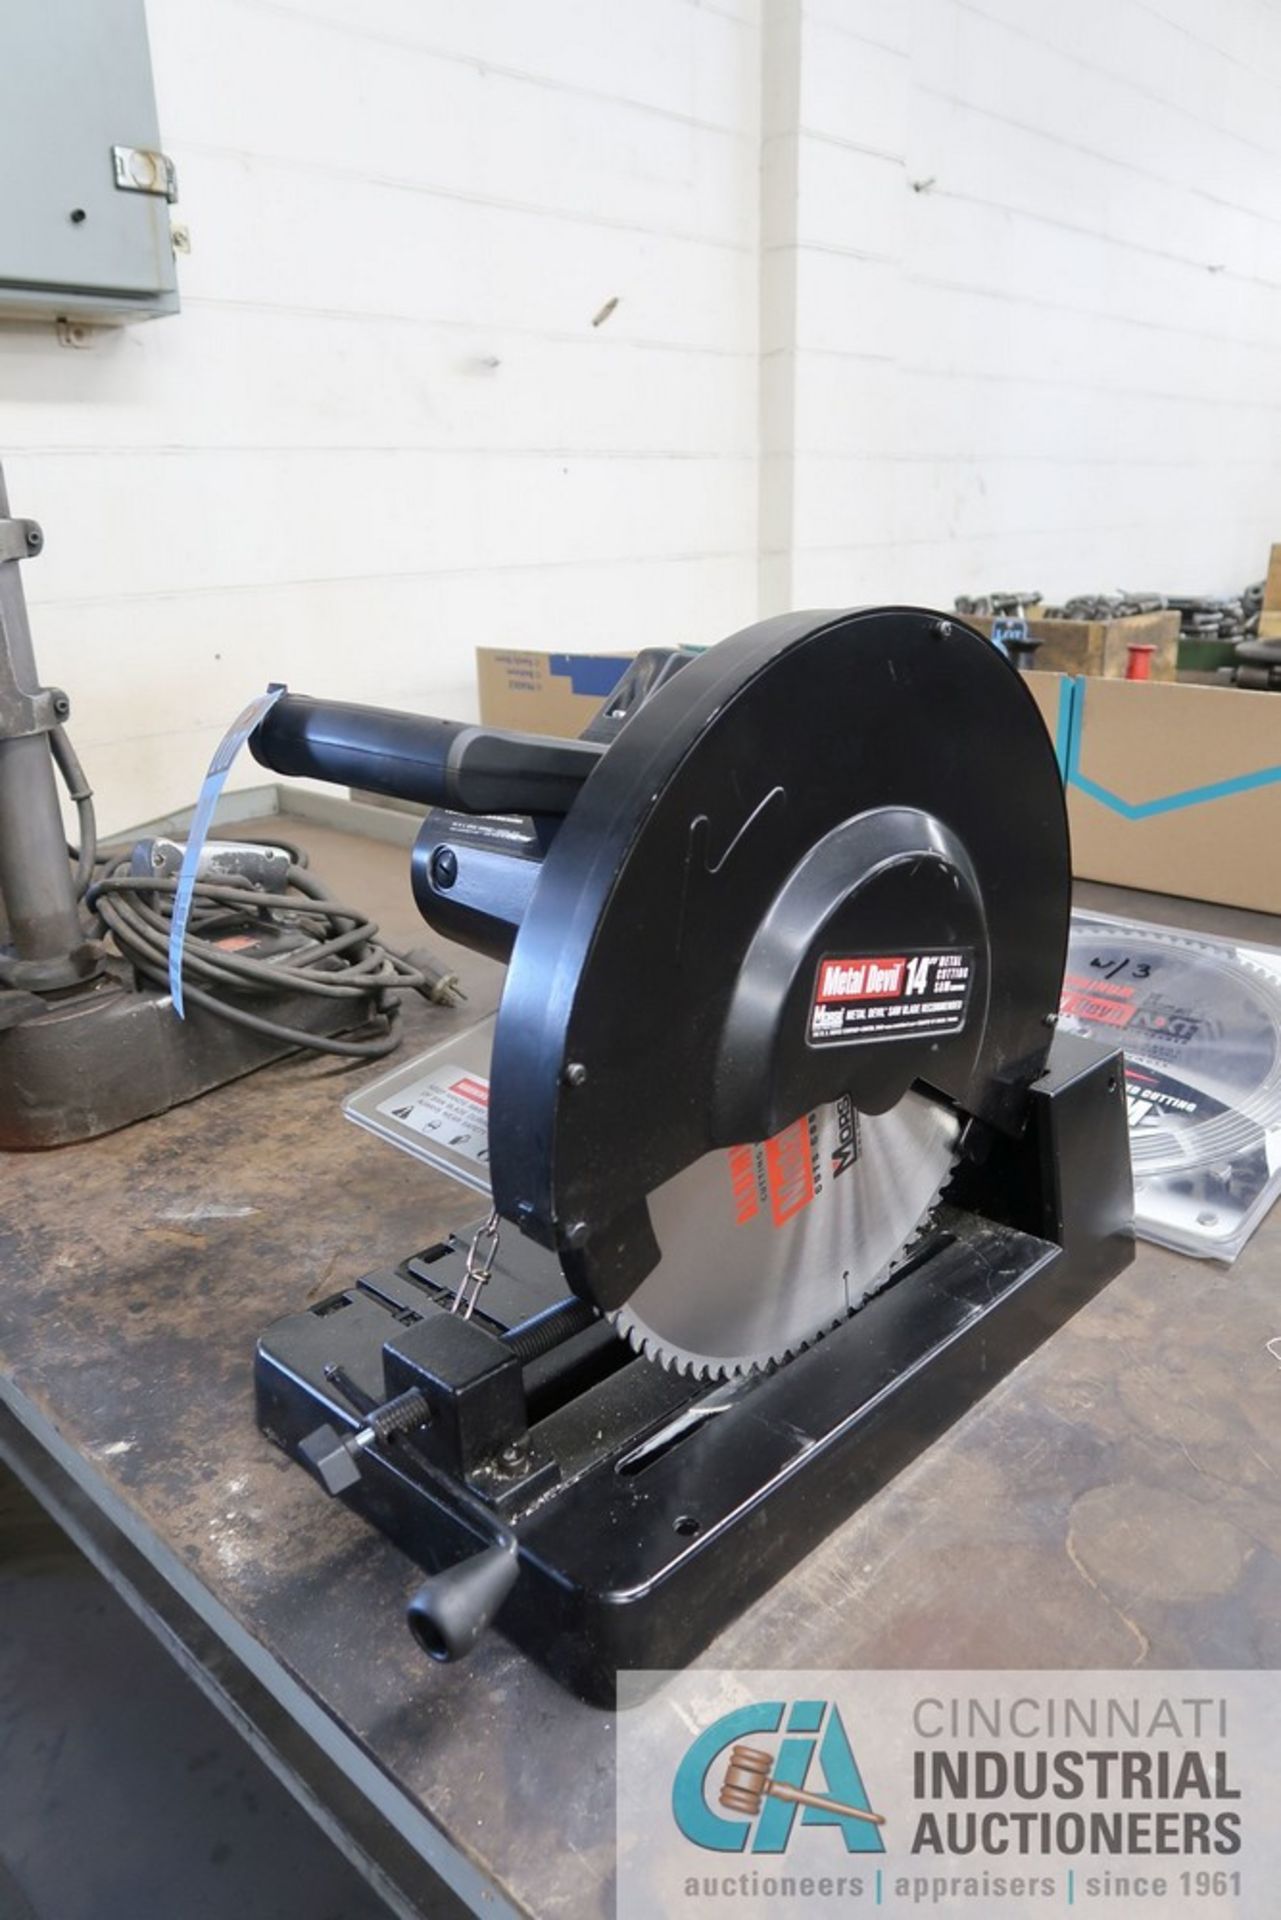 14" MORSE MODEL CSM14MB "METAL DEVIL" METAL CUTTING SAW WITH EXTRA BLADES - Image 2 of 3